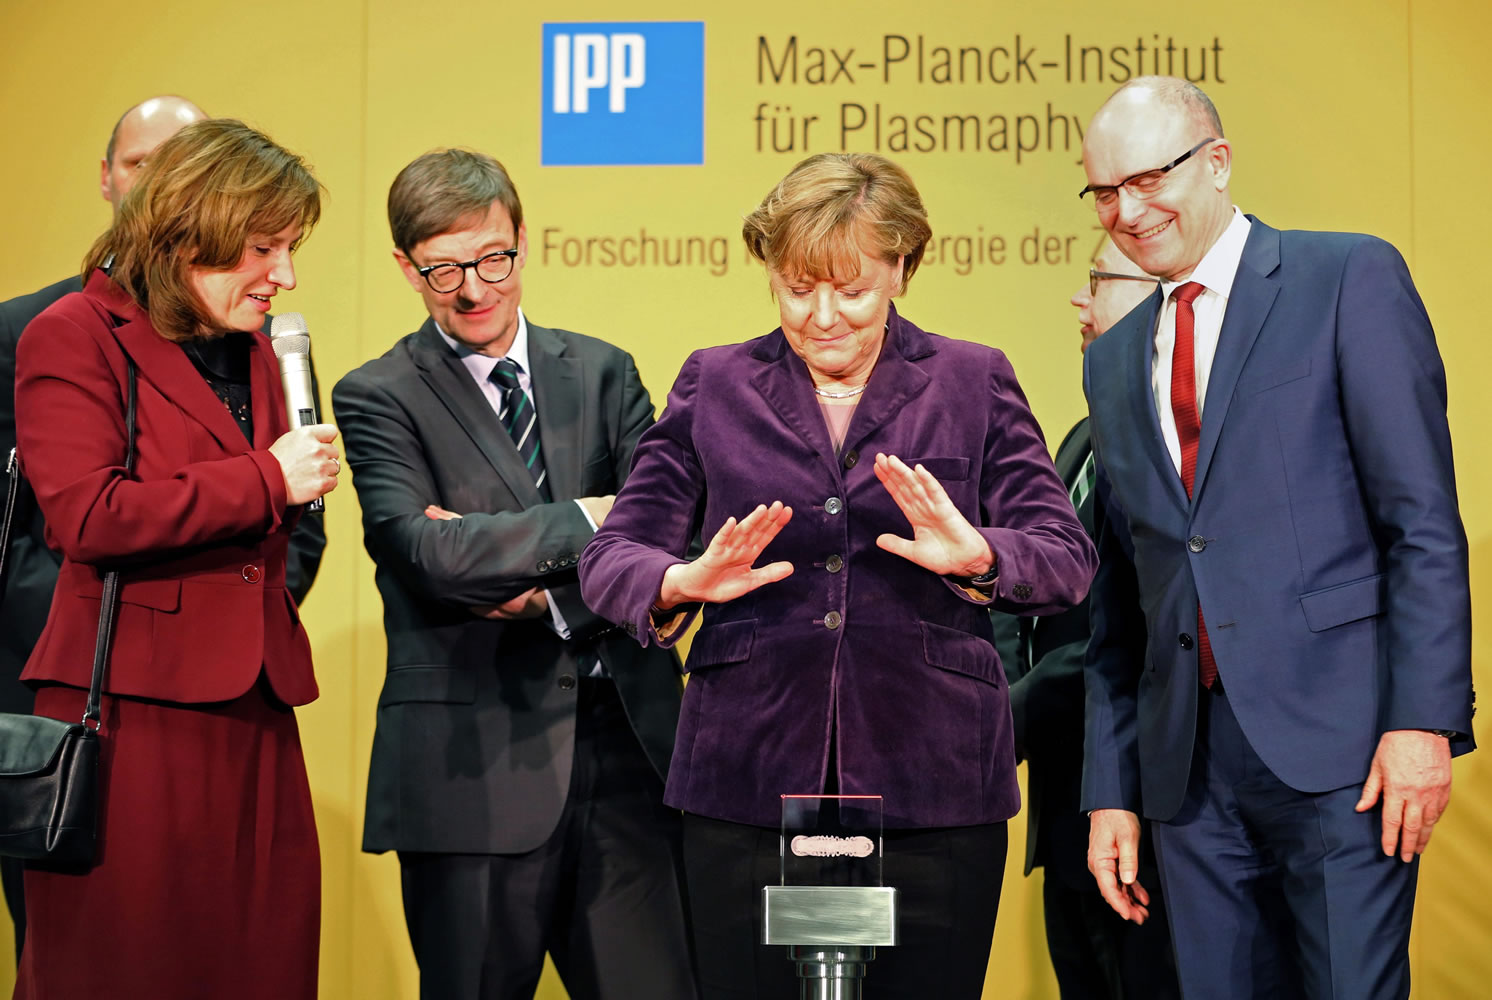 German chancellor Angela Merkel  prepares to press the start bottom next to the head of the Max Planck Institute for Plasma Physics  Sibylle Guenter, left, and Mecklenburg-Western Pomerania governor, Erwin Sellering, right, at the Wendelstein 7-X nuclear fusion research center at the Max-Planck-Institut for Plasma Physics in Greifswald, Germany, on Wednesday. Scientists flipped the switch  on an experiment they hope will advance the quest for nuclear fusion, considered a clean and safe form of nuclear power.